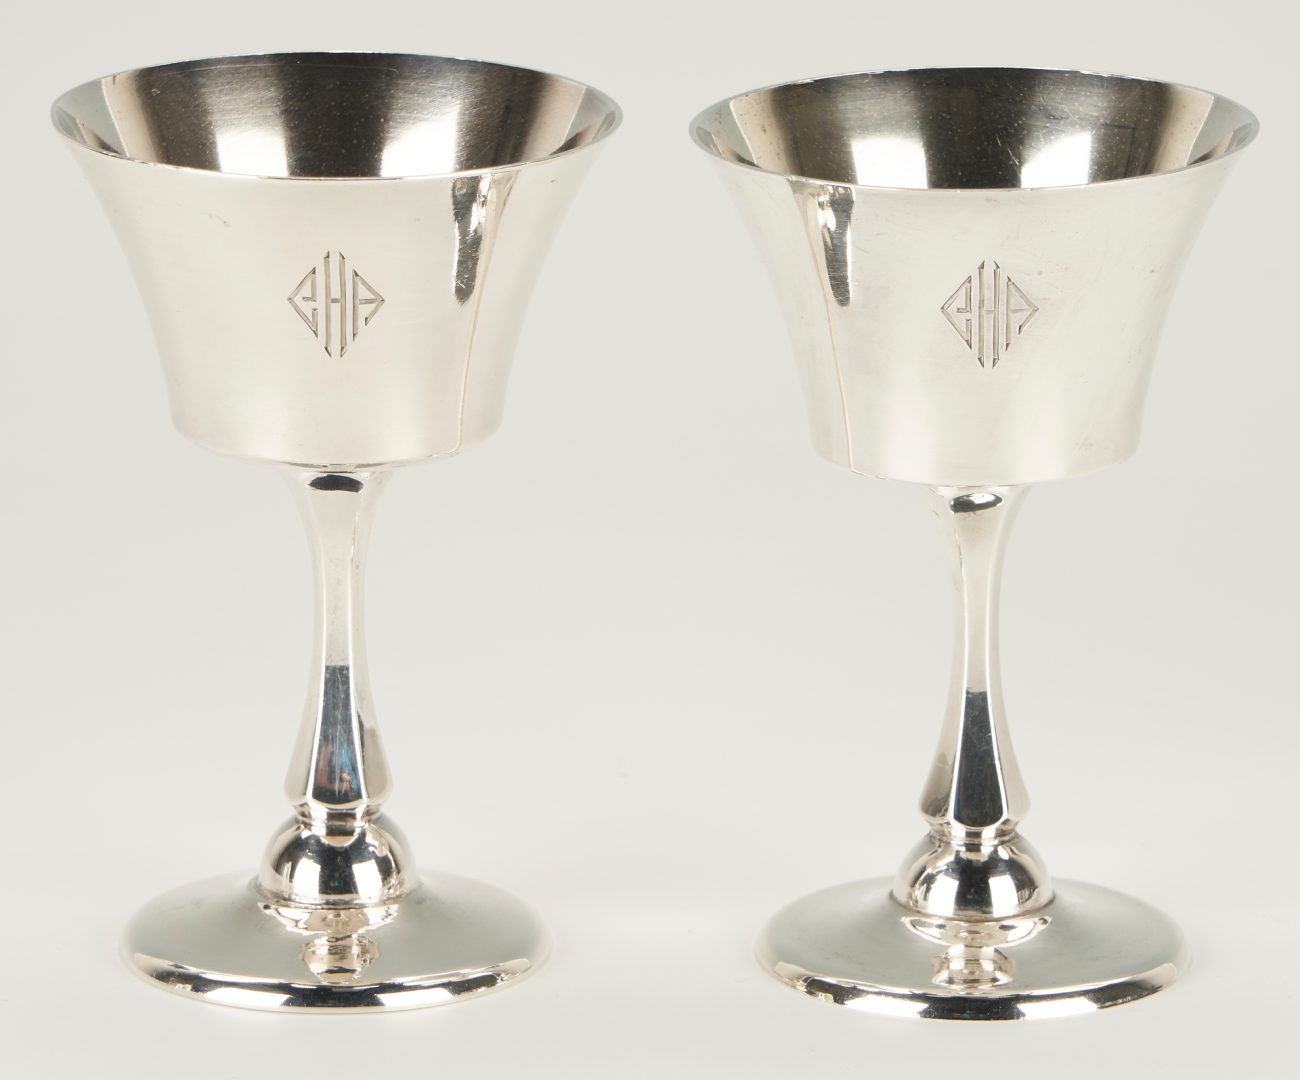 Lot 821: 12 Black, Starr, & Frost Small Sterling Silver Wine Goblets